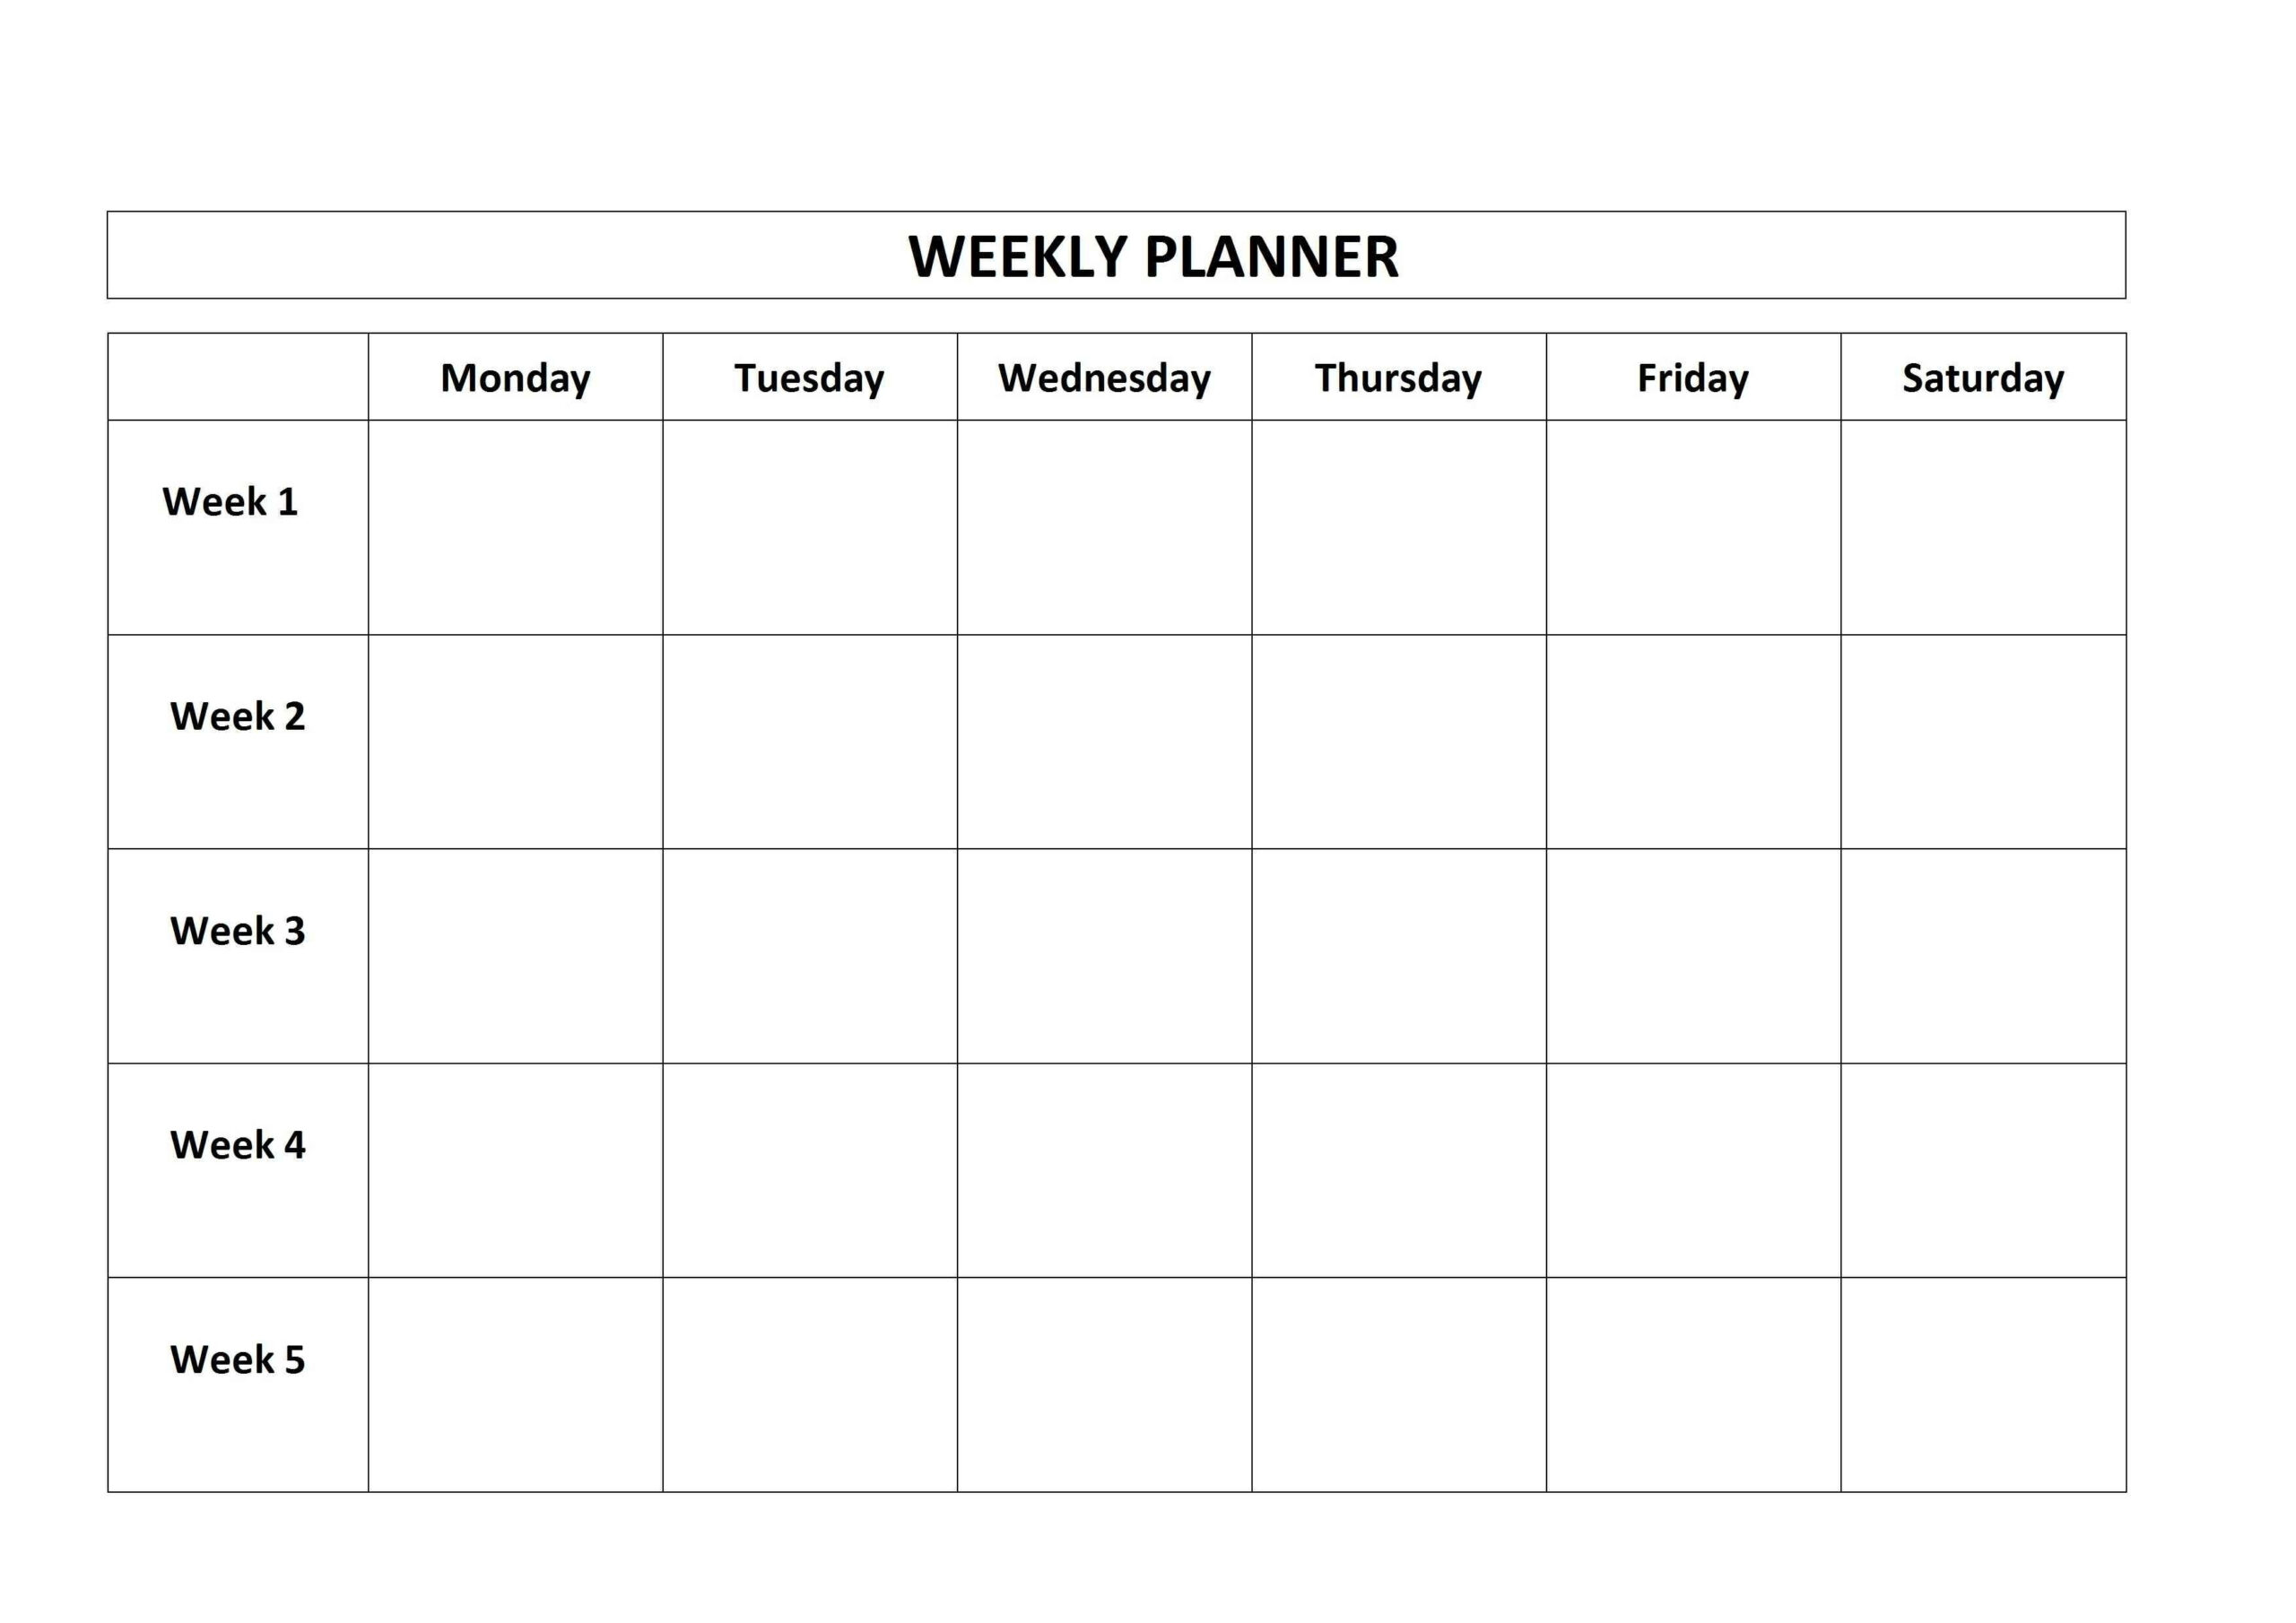 Mondayfriday Blank Weekly Schedule | Calendar Template Printable in Blank Calendar Printable Monday To Friday